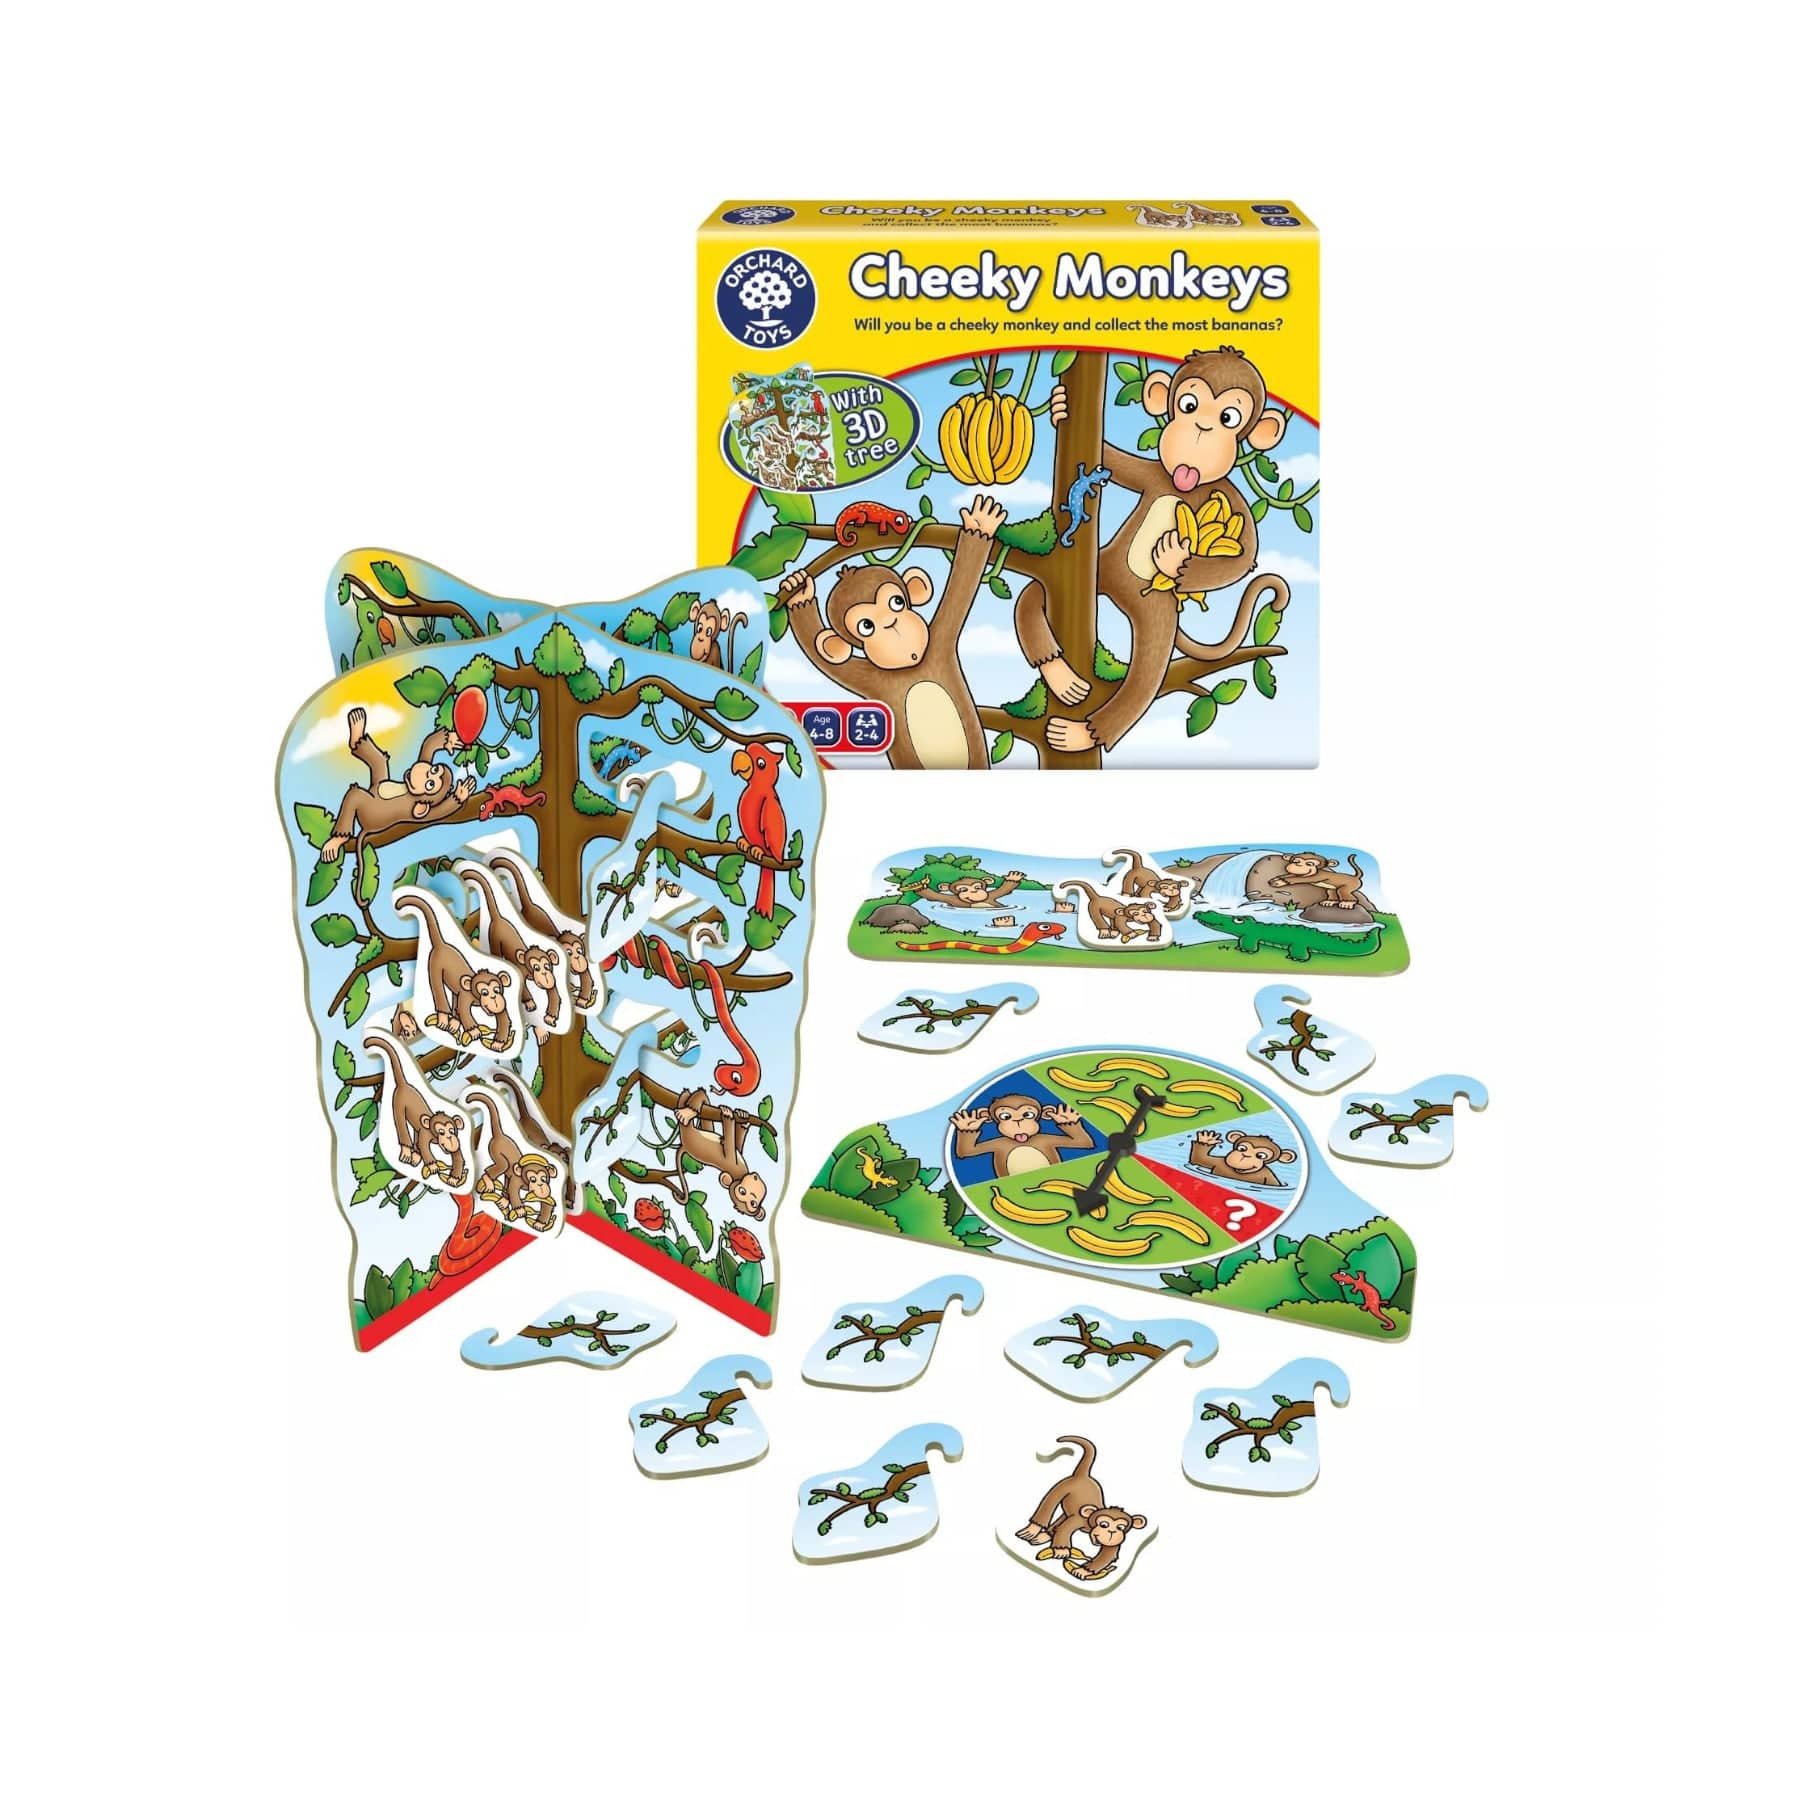 Children's board game "Cheeky Monkeys" with colorful box, illustrated playing pieces, and 3D tree with playful monkeys and bananas design.